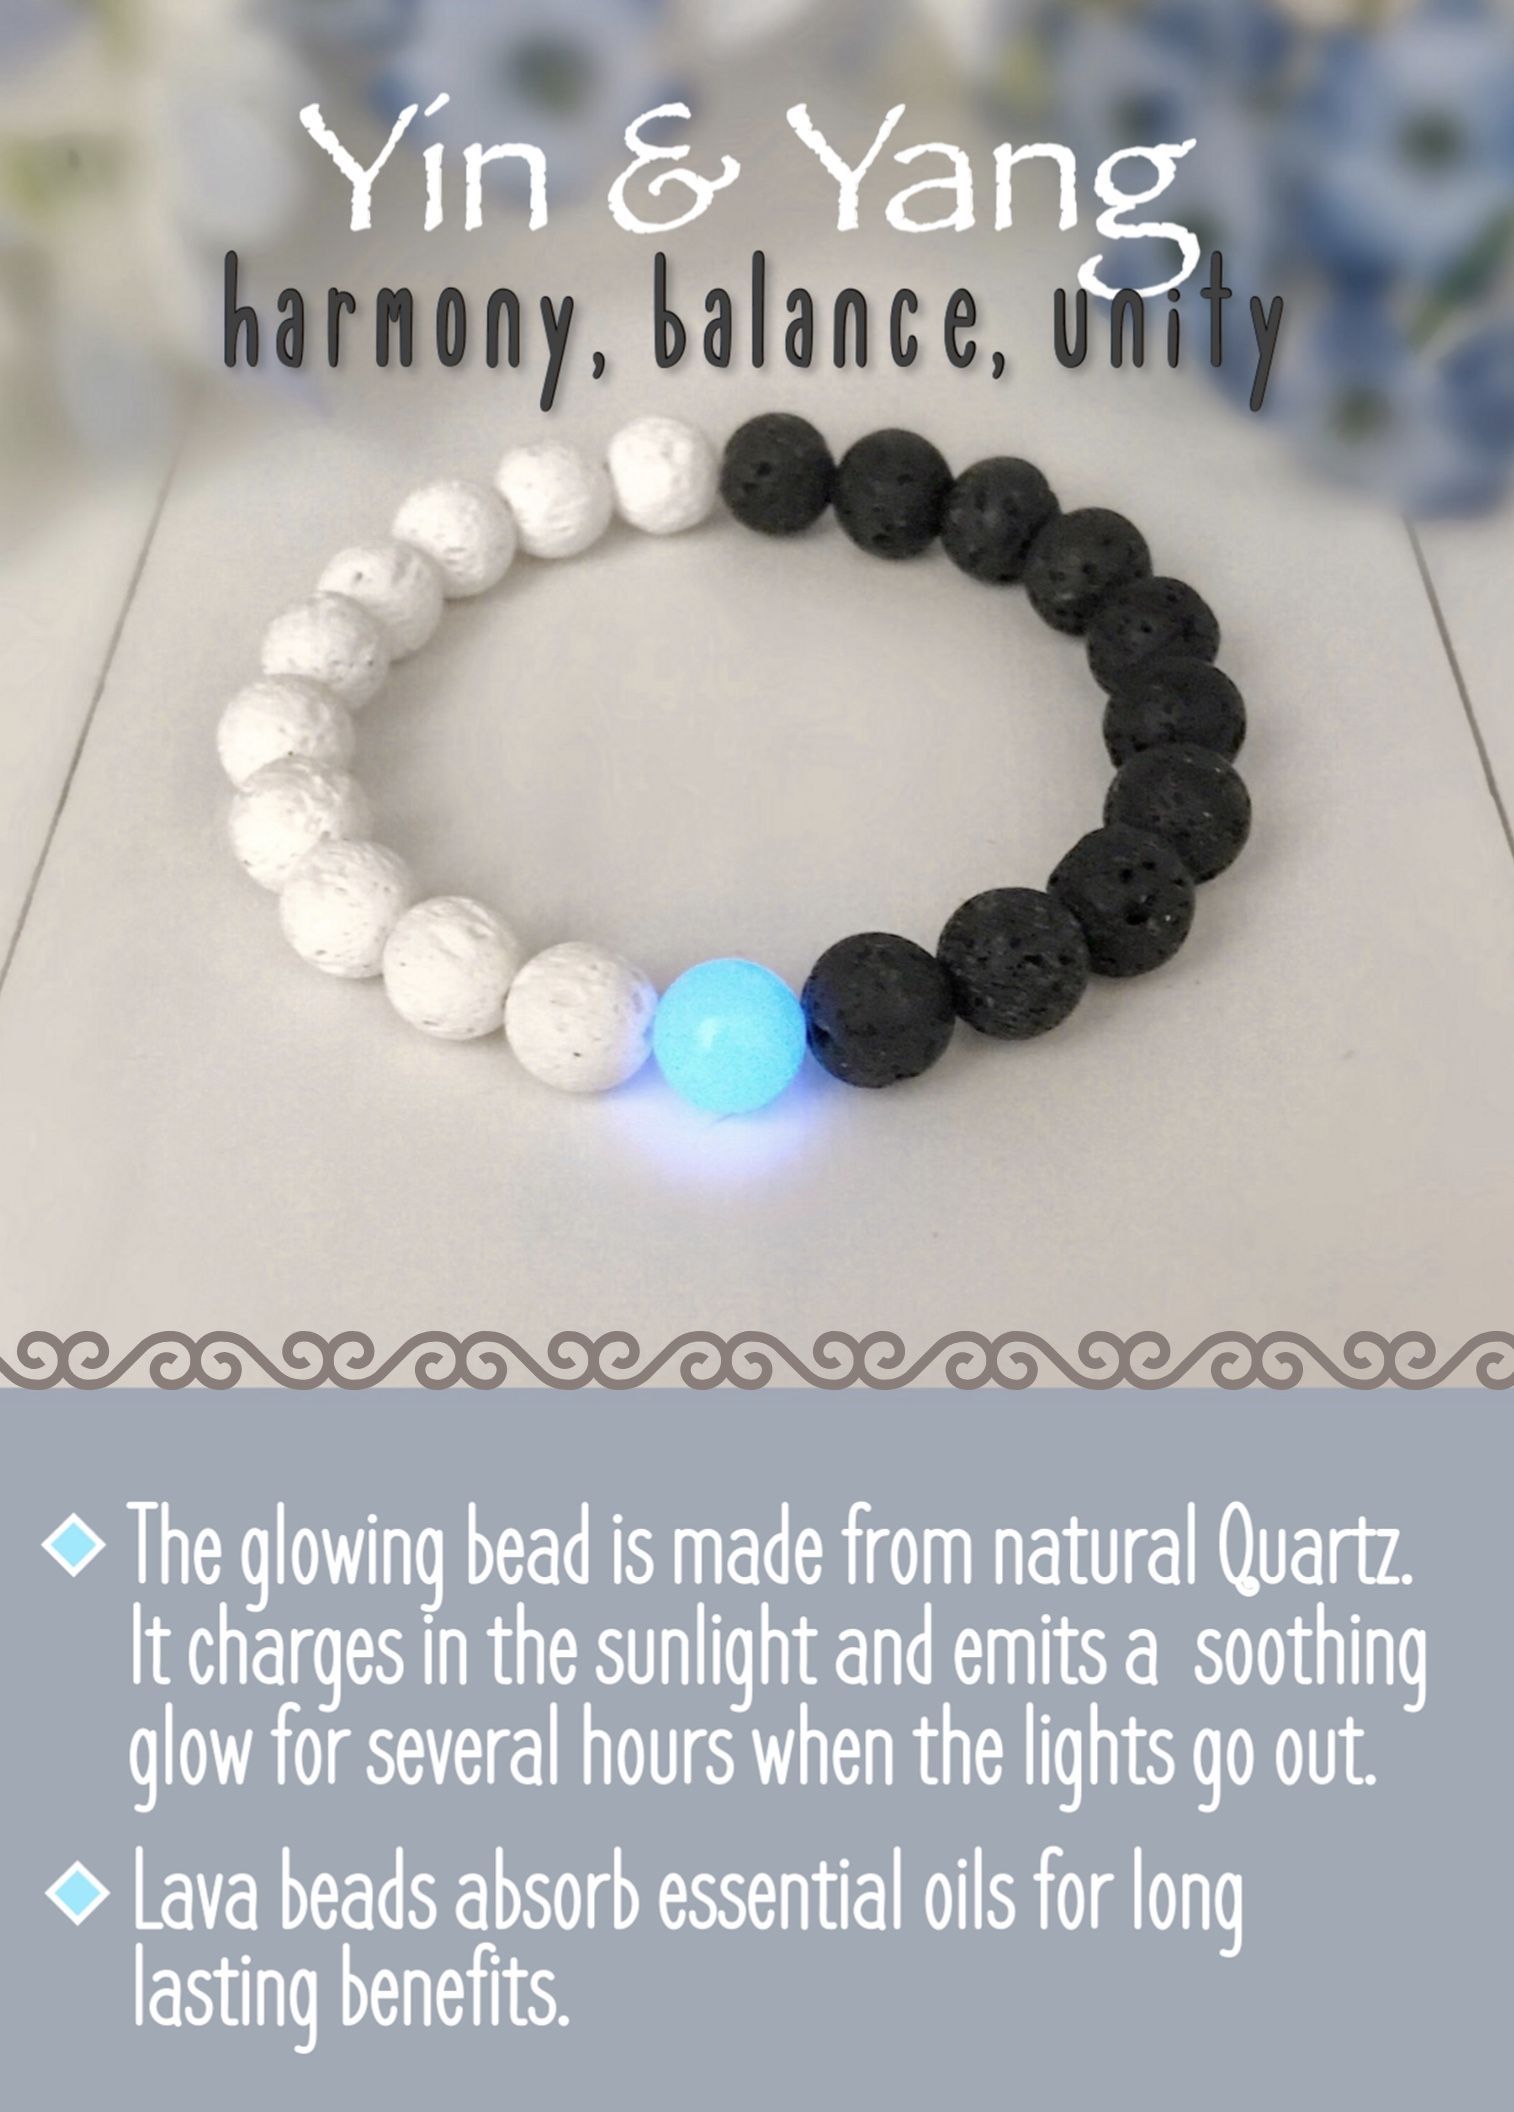 Yin and Yang Diffuser Bracelet with Glowing Quartz - Yin and Yang Diffuser Bracelet with Glowing Quartz -   22 diy Bracelets stone ideas